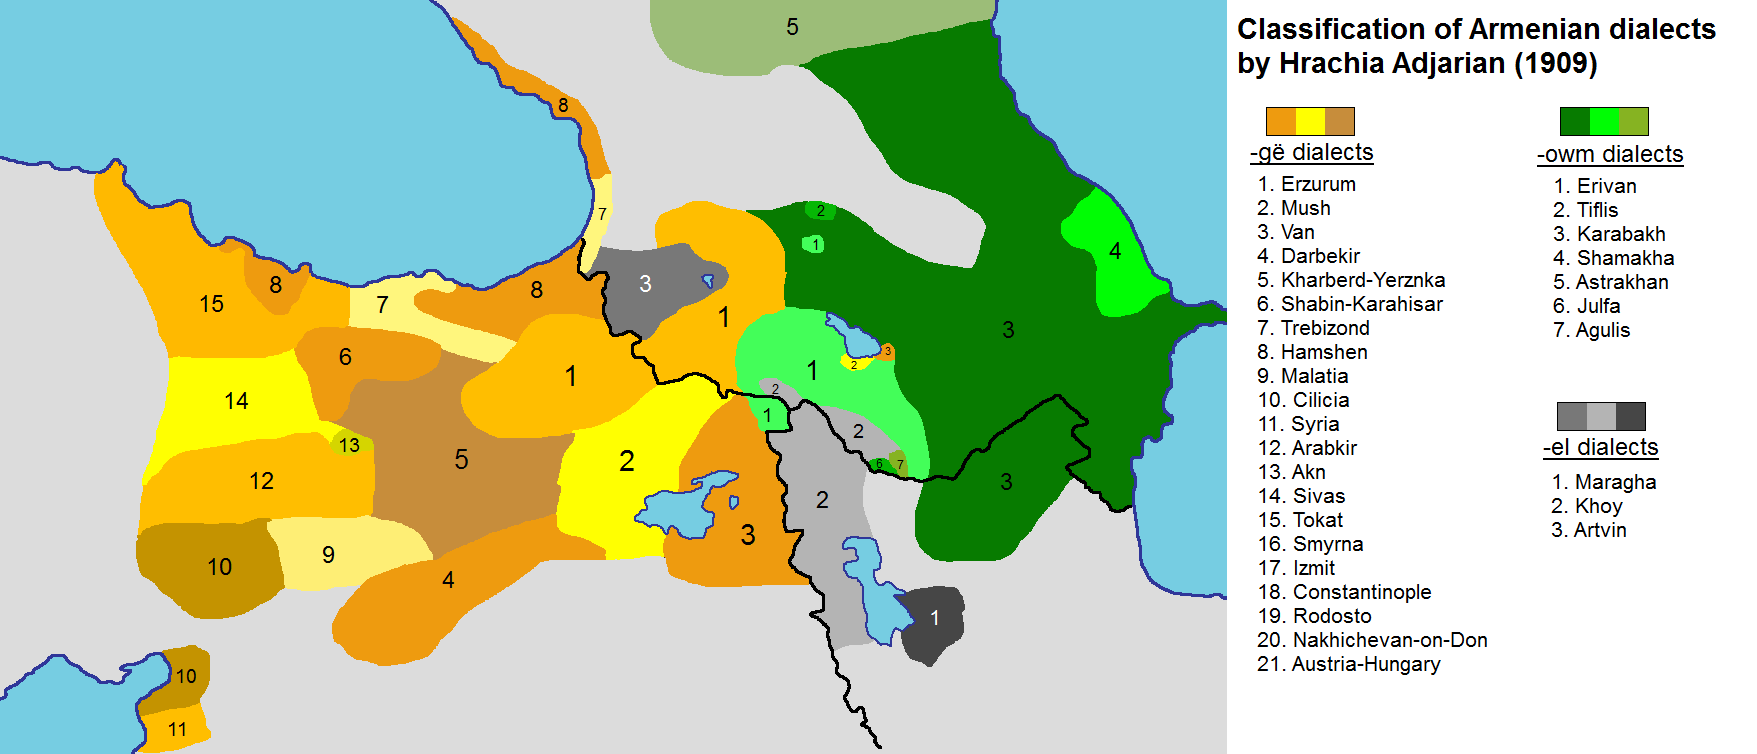 Distribution of Armenian dialects in the Ottoman and Russian empires, according to Adjarian’s Classification des dialectes arméniens, published in 1909; many dialects disappeared as a result of the Armenian Genocide and due to other demographic and social shifts of the 20th century.